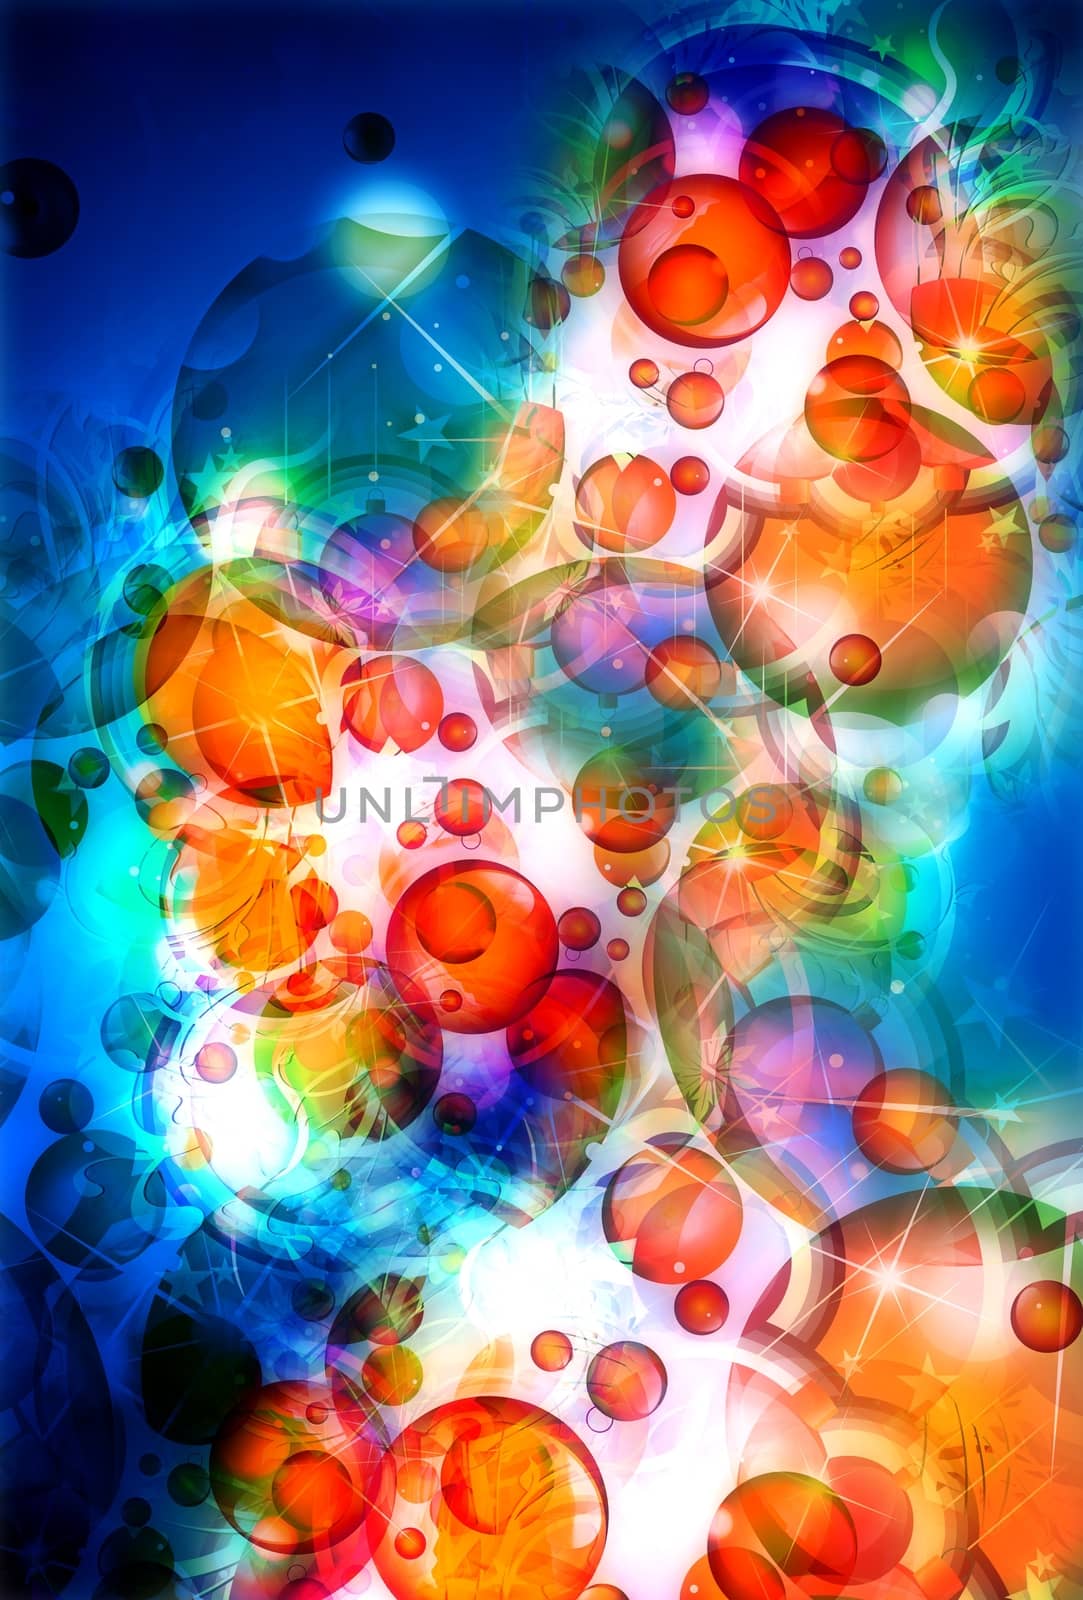 Colorful Abstract Bubbles Illustration. Cool Abstract Background with Bubbles.